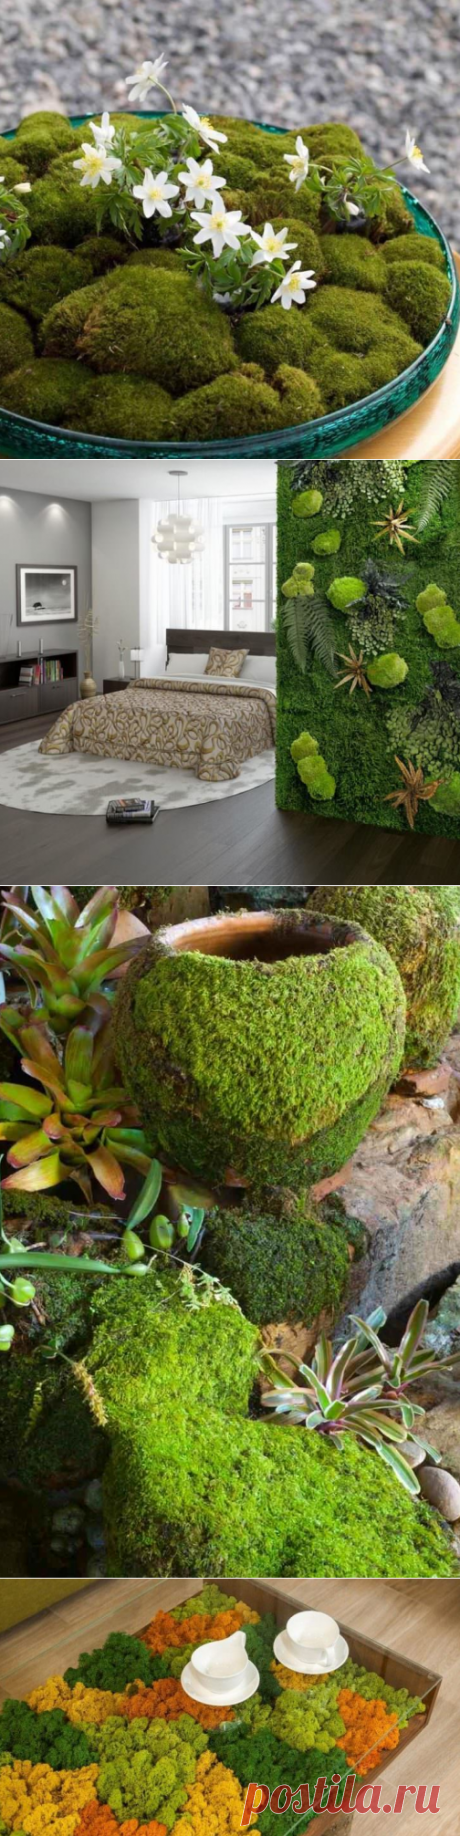 √ 37 Best Indoor and Outdoor Moss Decorative Ideas In 2019 - Home and Gardens